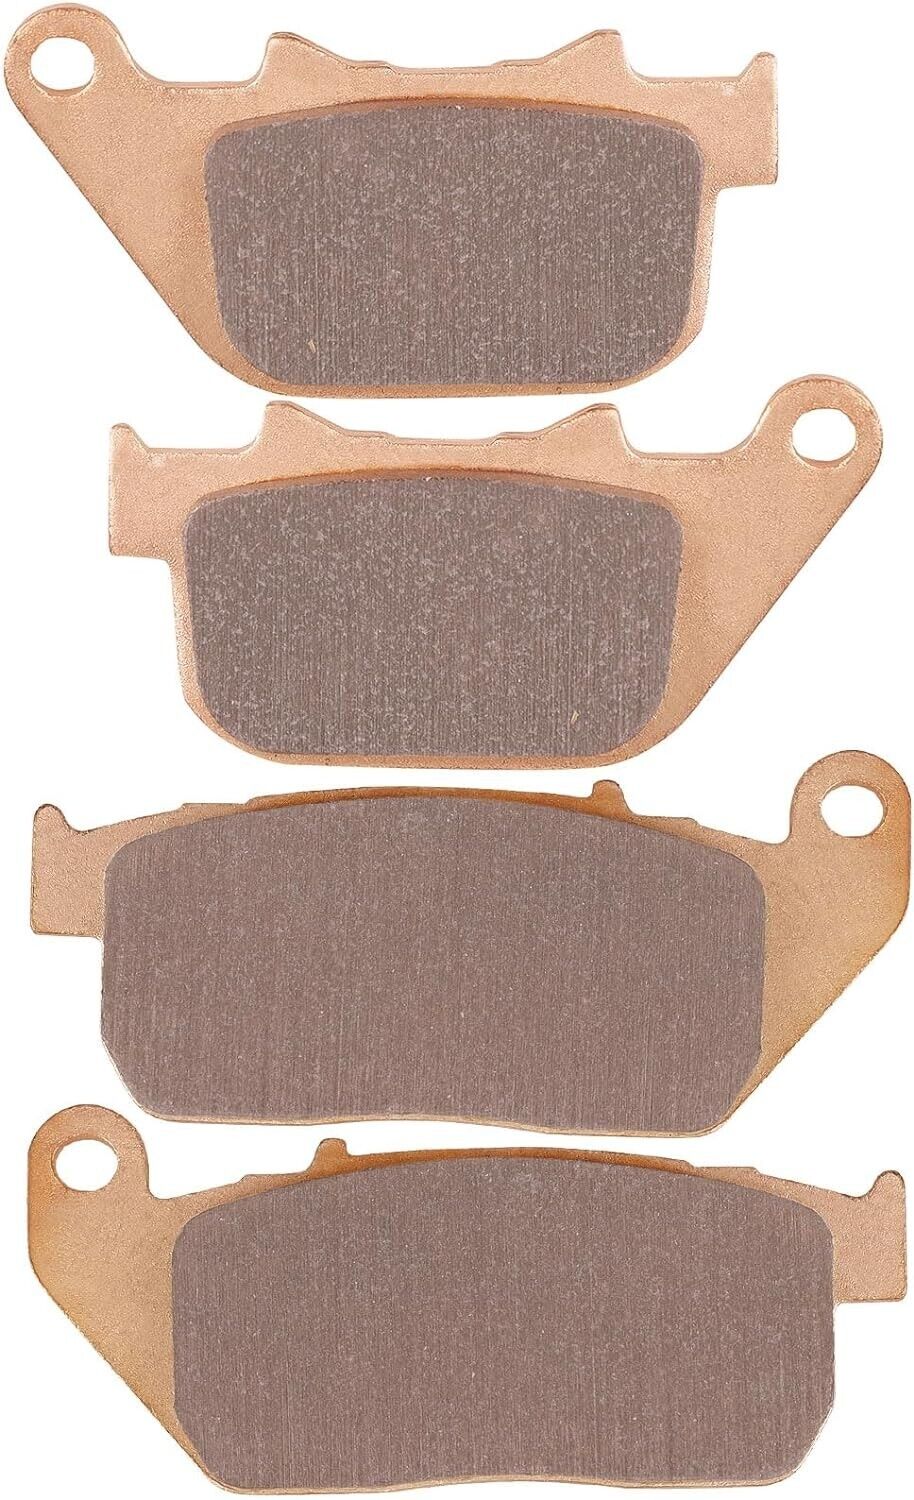 Brake Pads Front and Rear for Harley Davidson Sportster 883 1200 XL883 XL883C XL